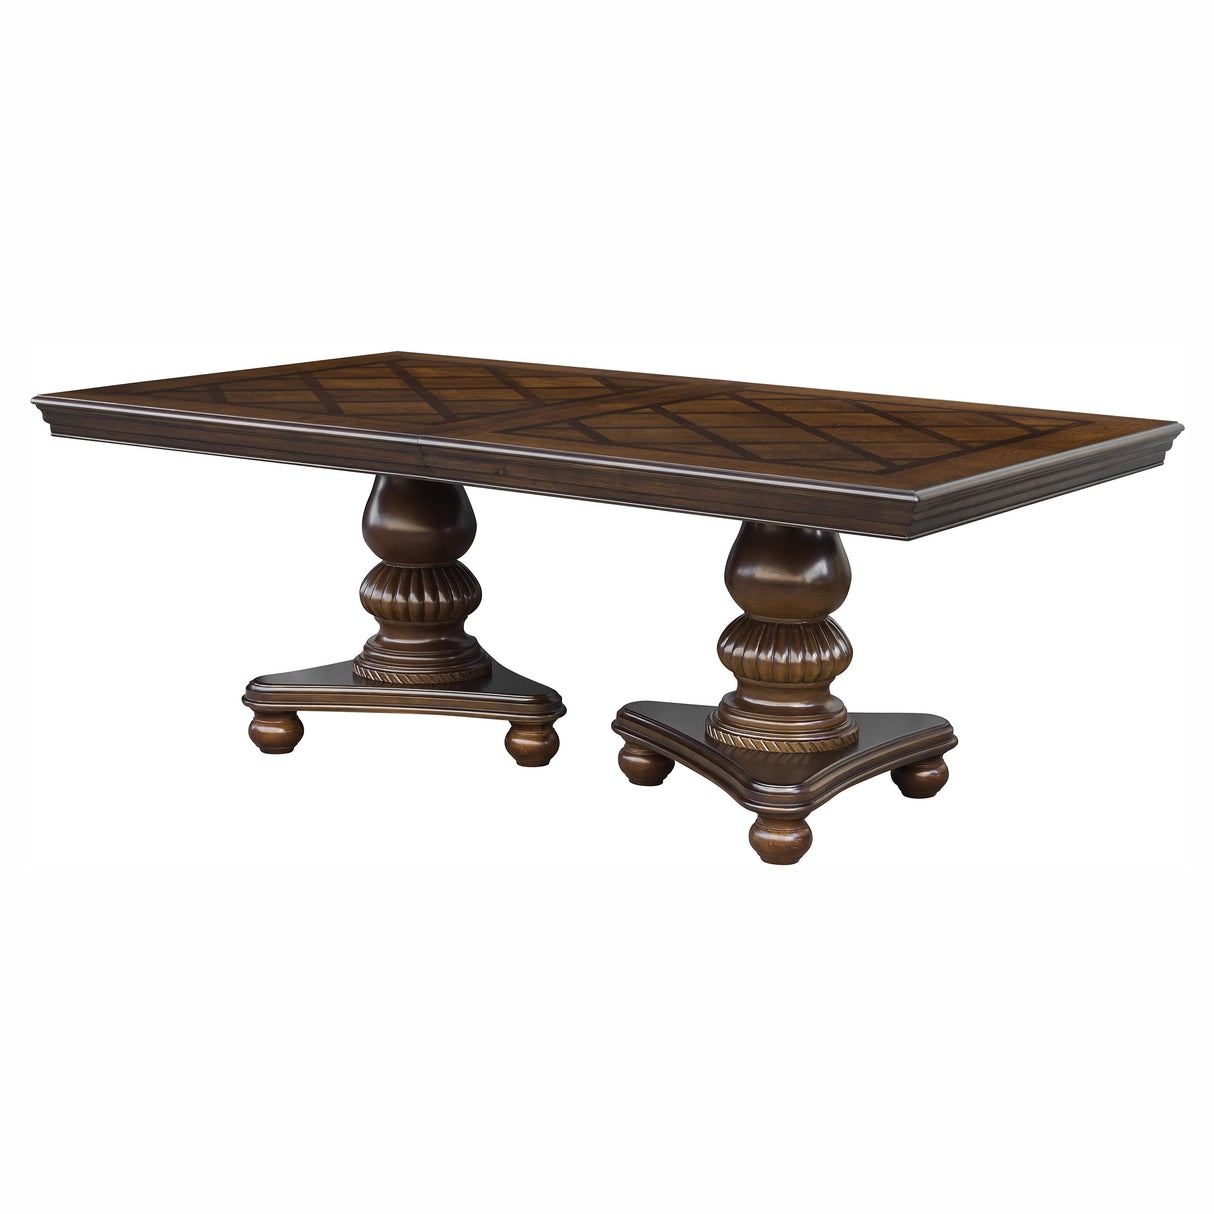 Traditional Dining Table 1pc Brown Cherry Finish Double Pedestal Base Separate Extension Leaf Dining Furniture - Home Elegance USA